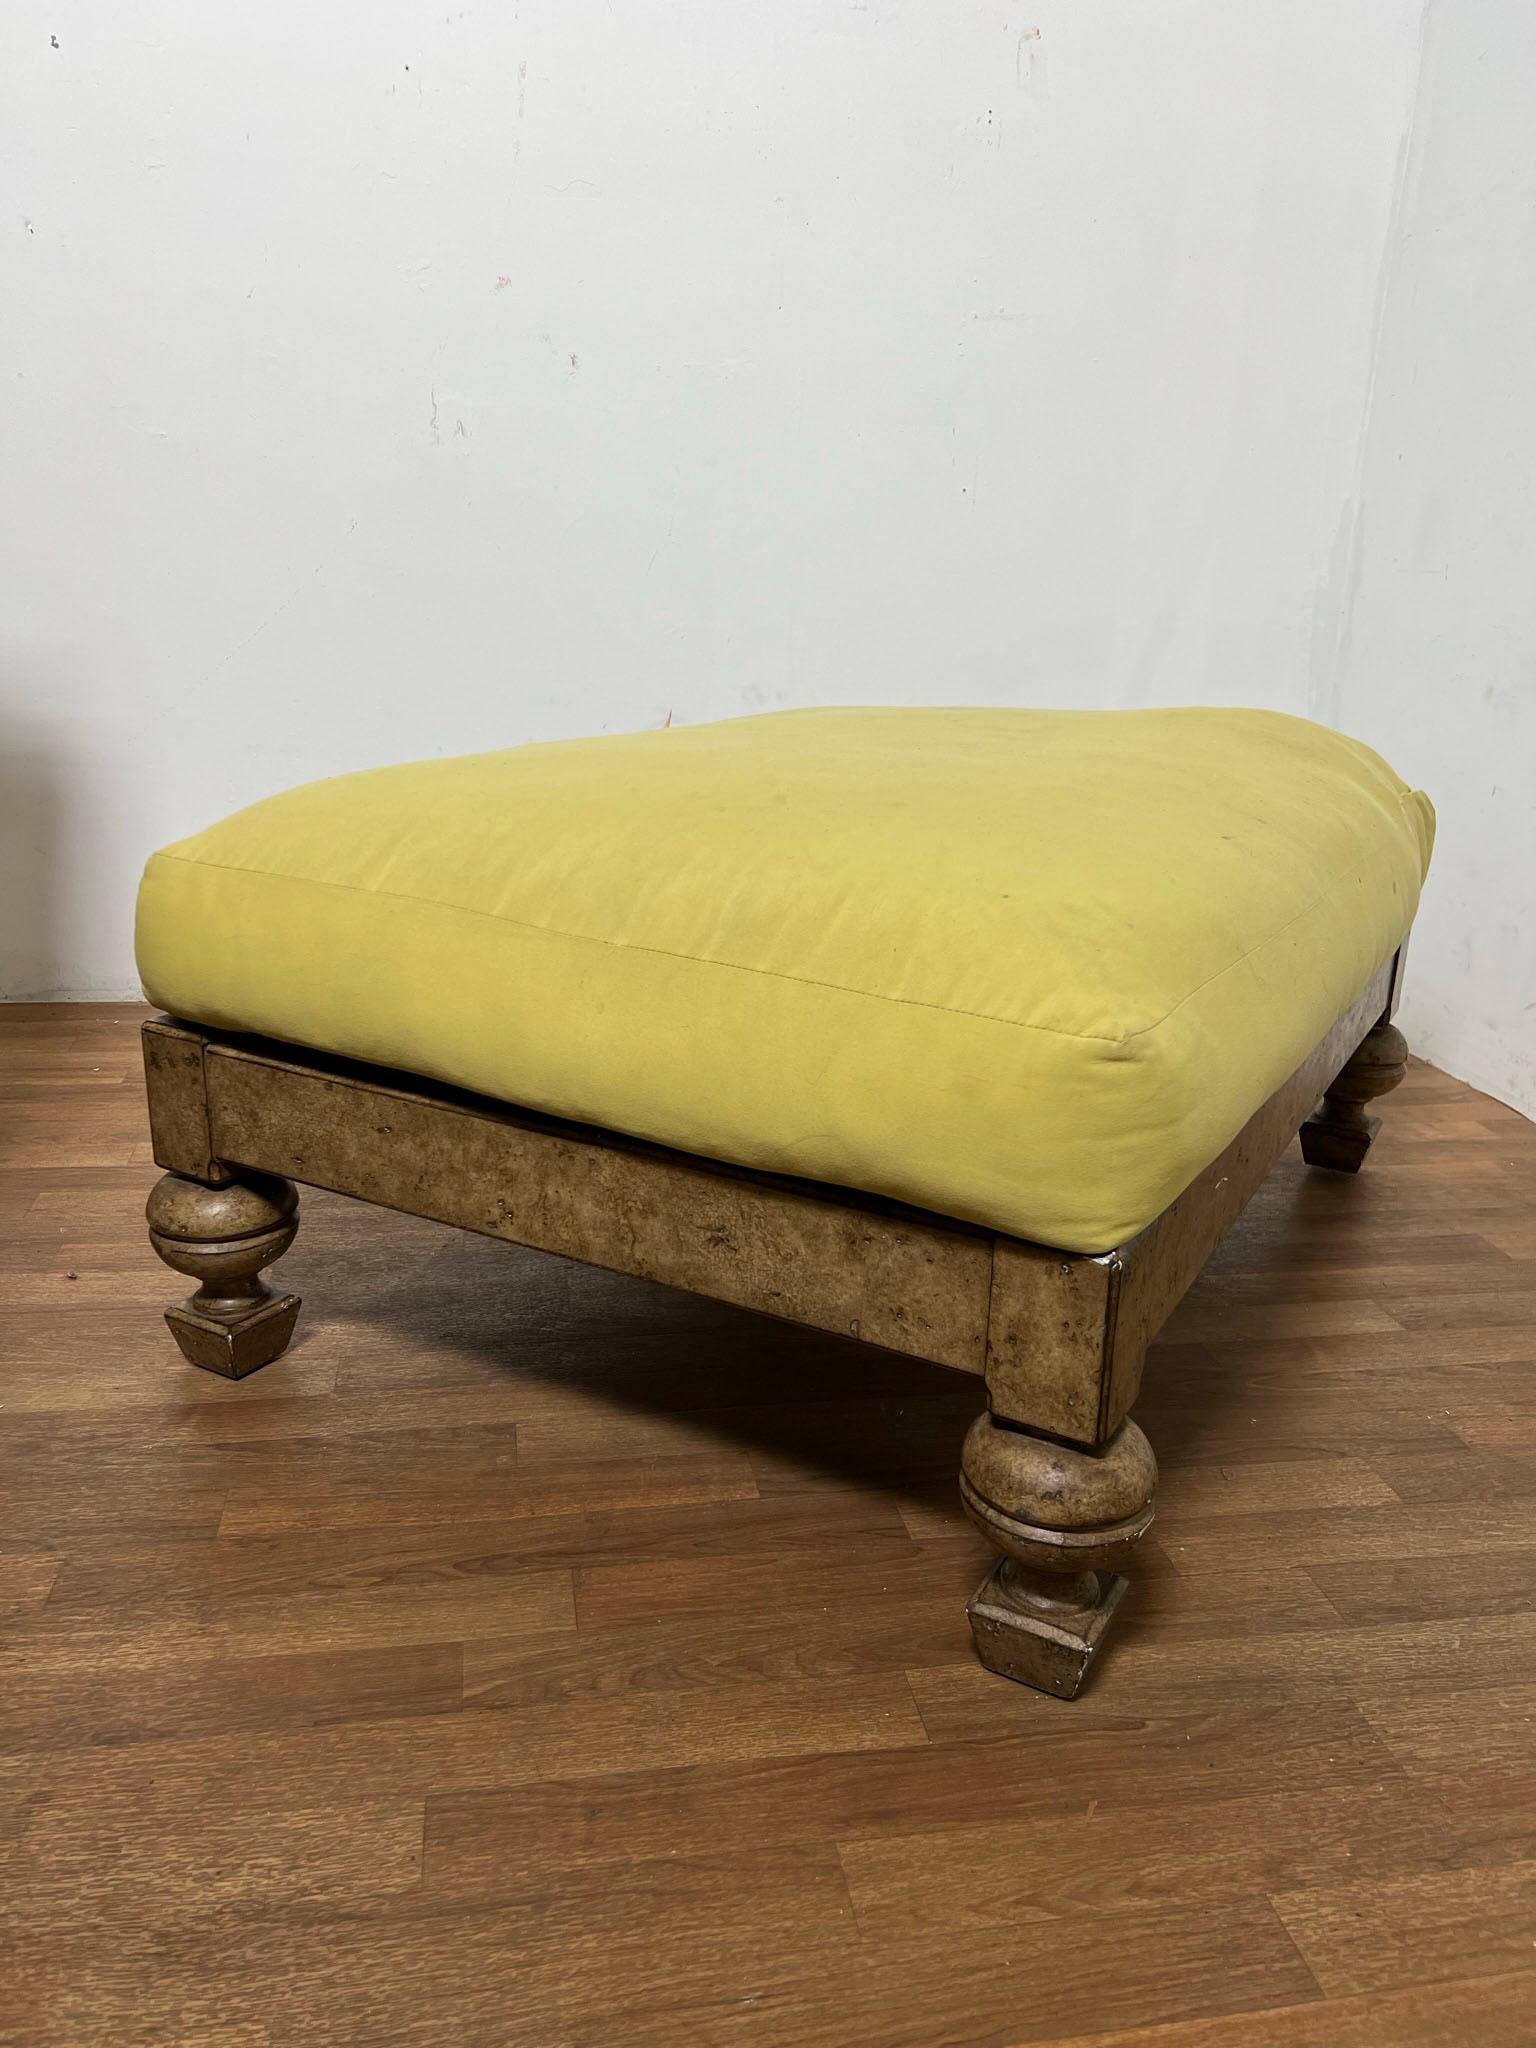 Marge Carson Oversized Burl Wood and Cane Lounge With Ottoman Circa 1980s For Sale 5